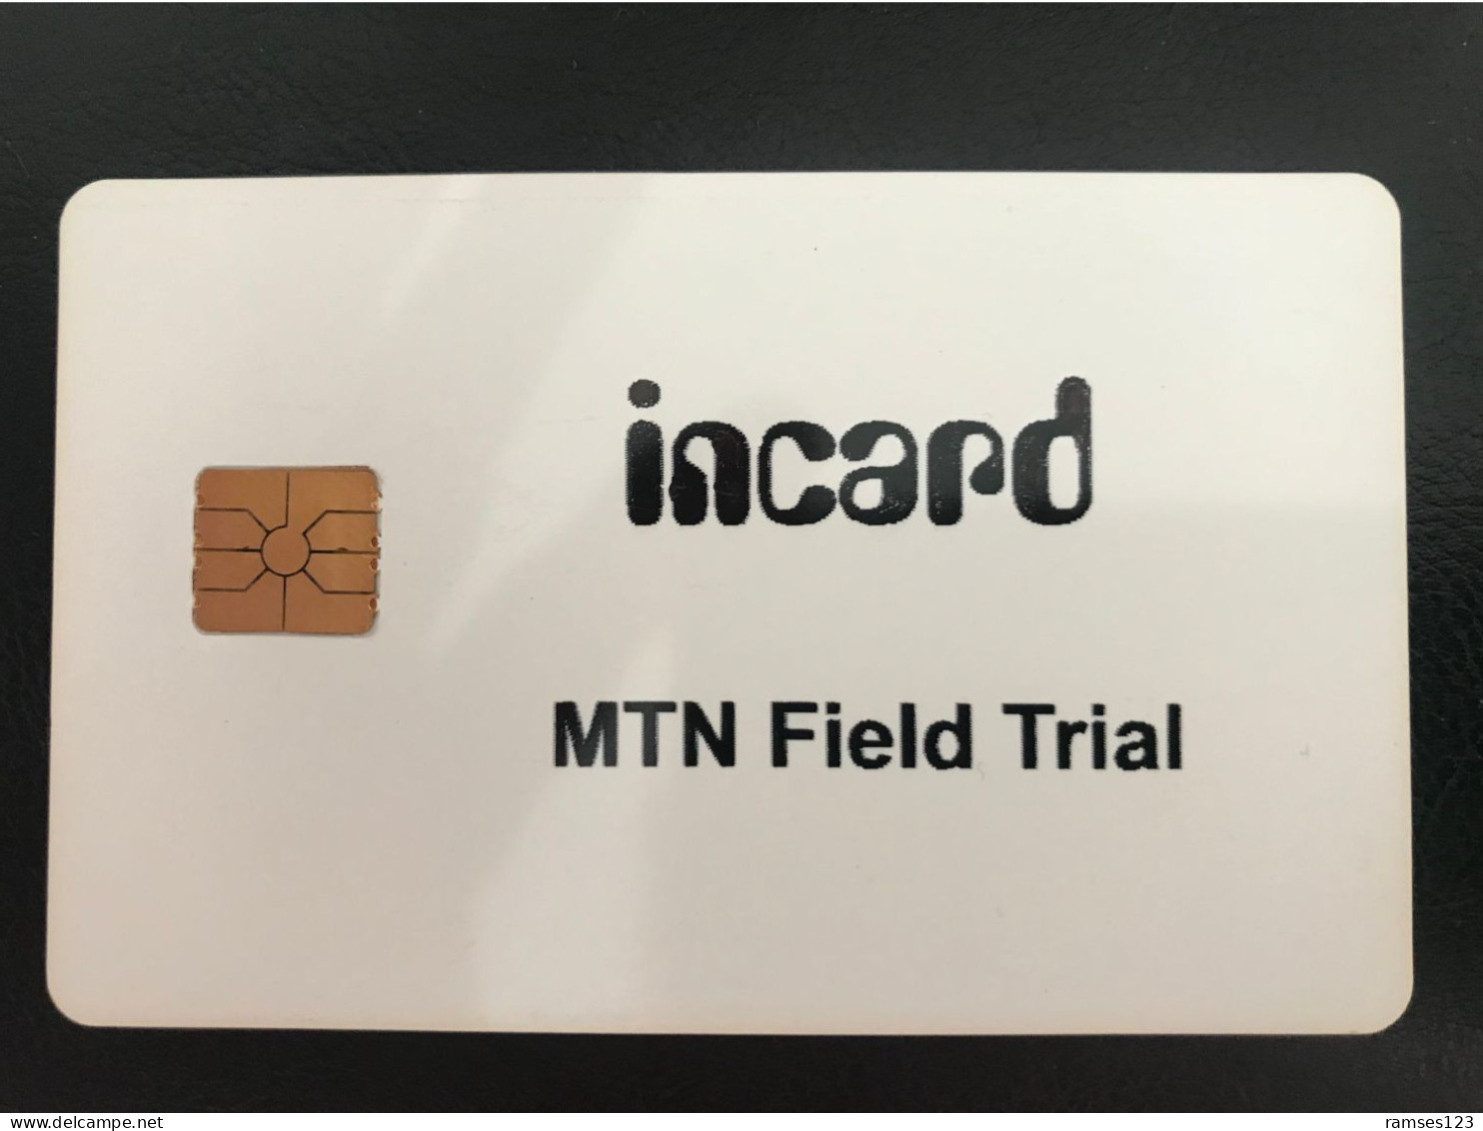 SOUTH AFRICA - Chip - INCARD - MTN Field Trial - VERY RARE - South Africa